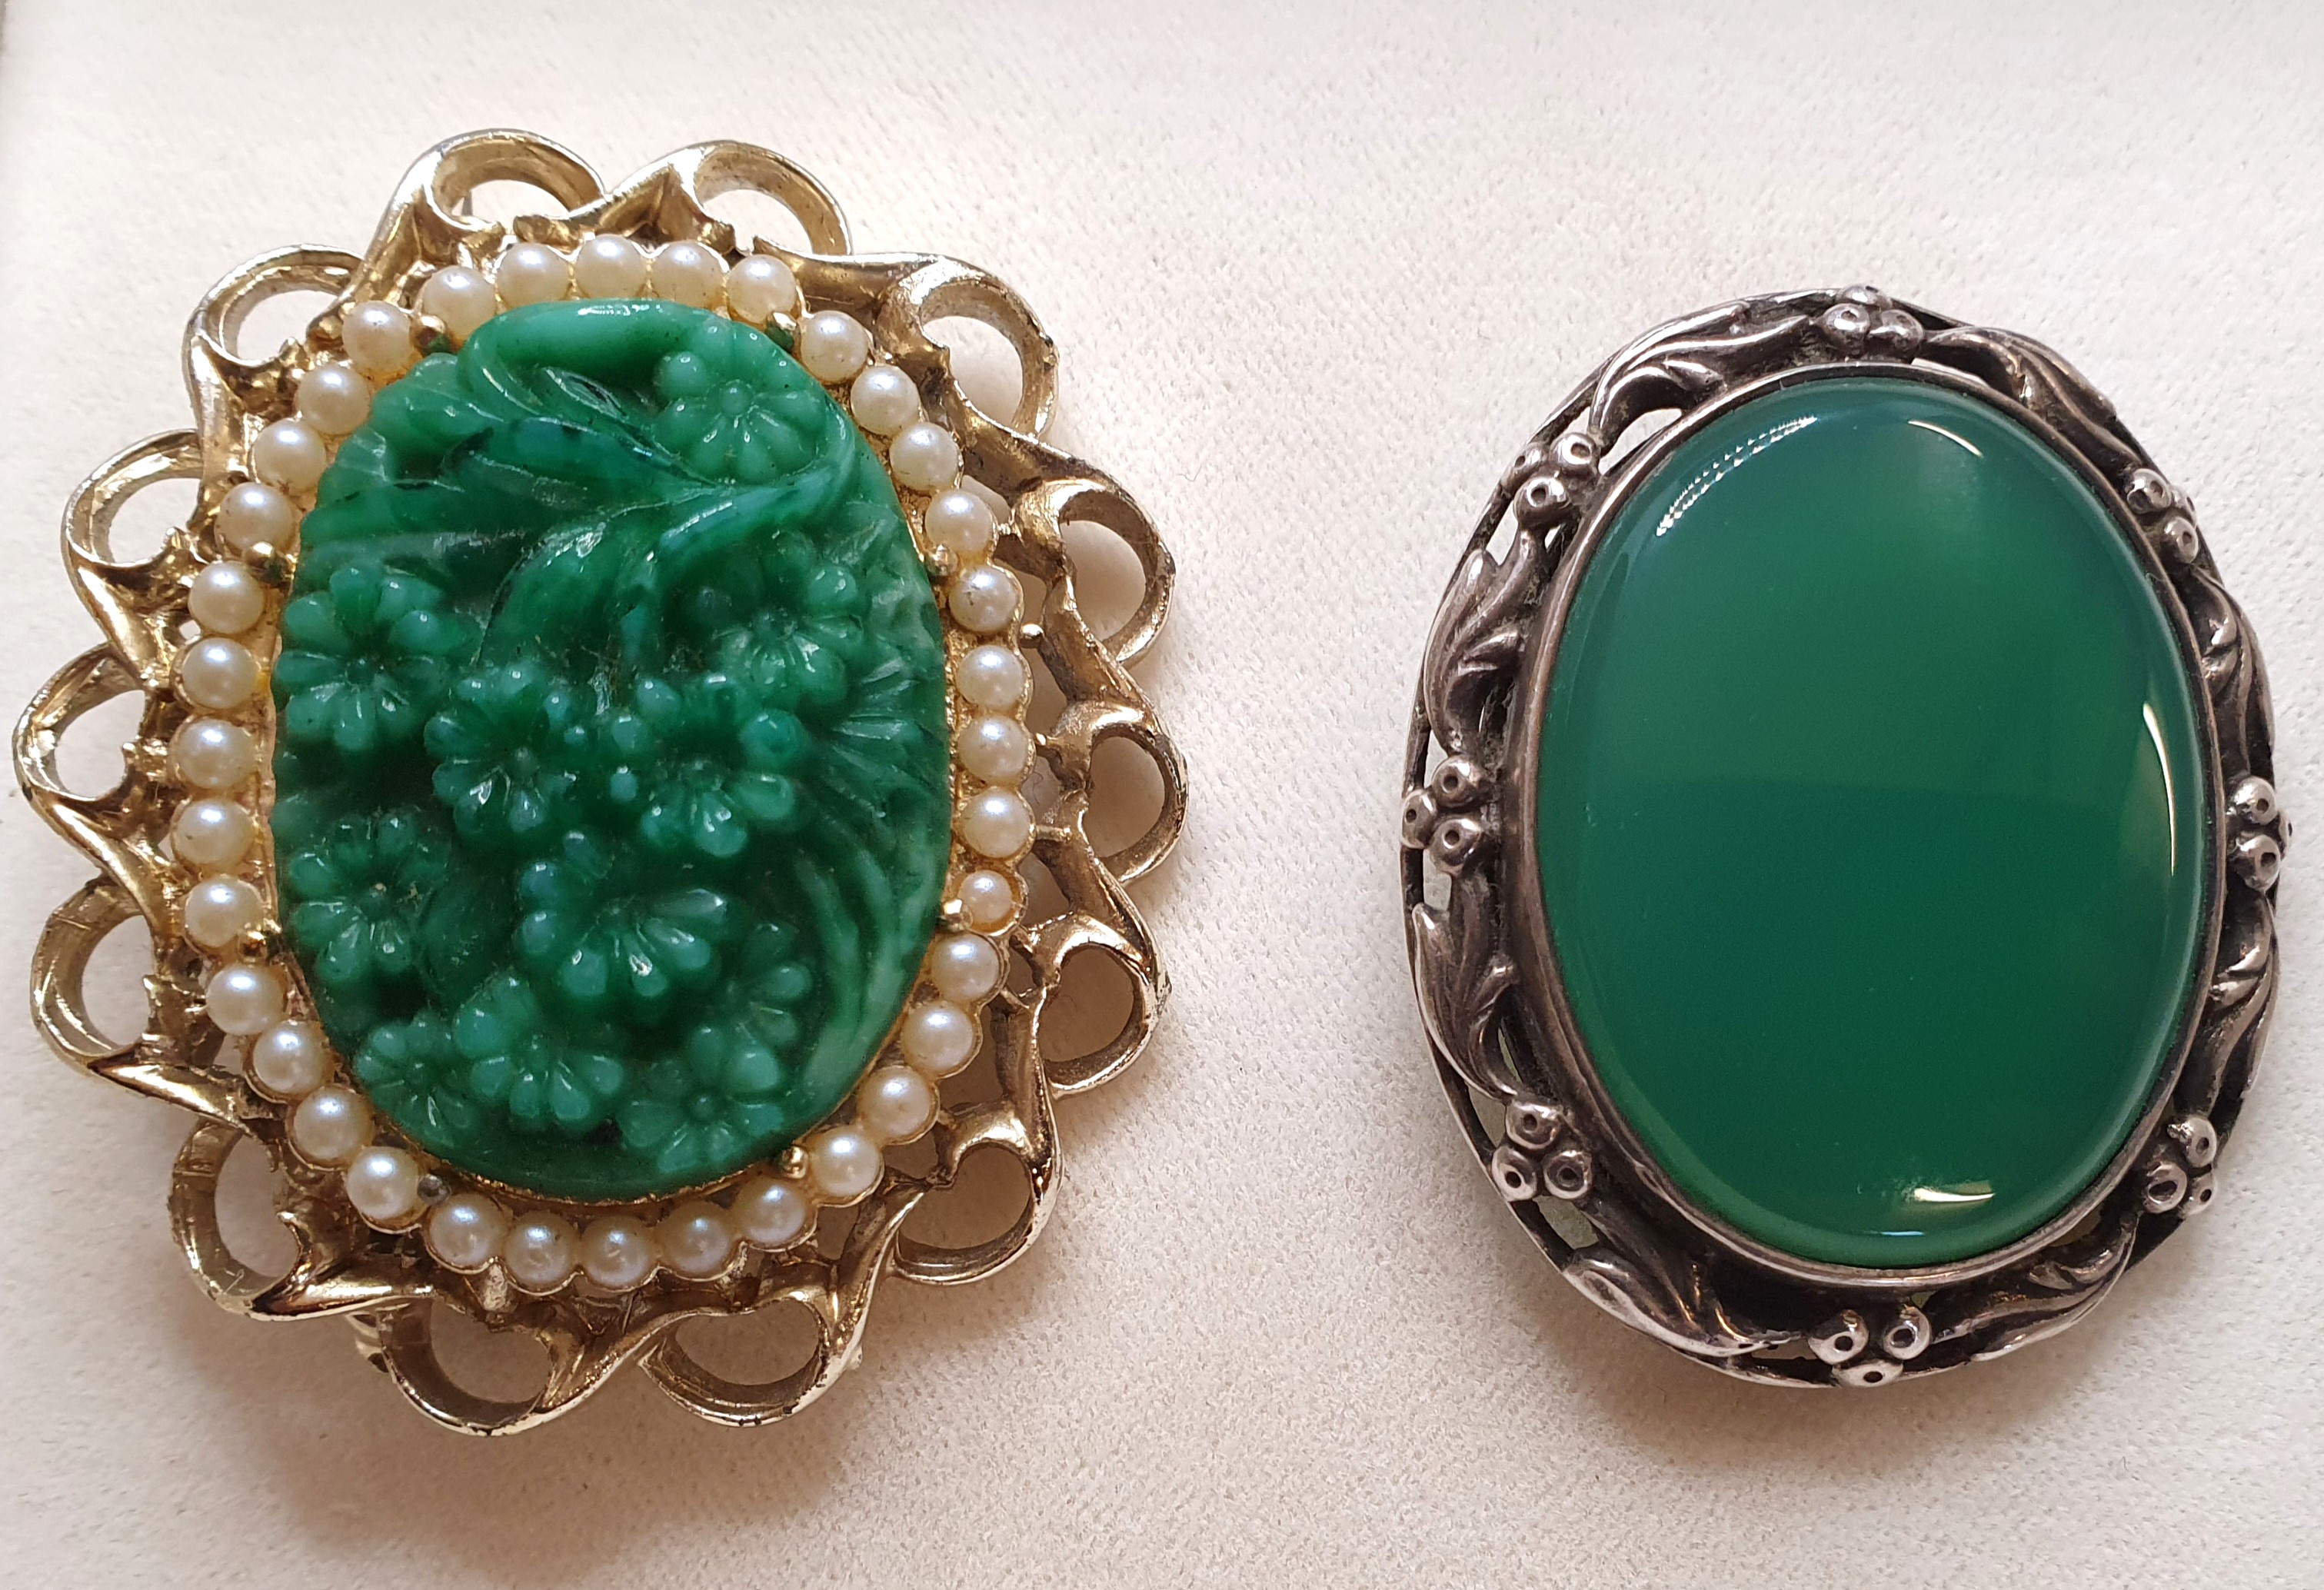 A Silver and Green Agate Brooch, hallmarked Sydney & Co, Birmingham 1939, plus one other